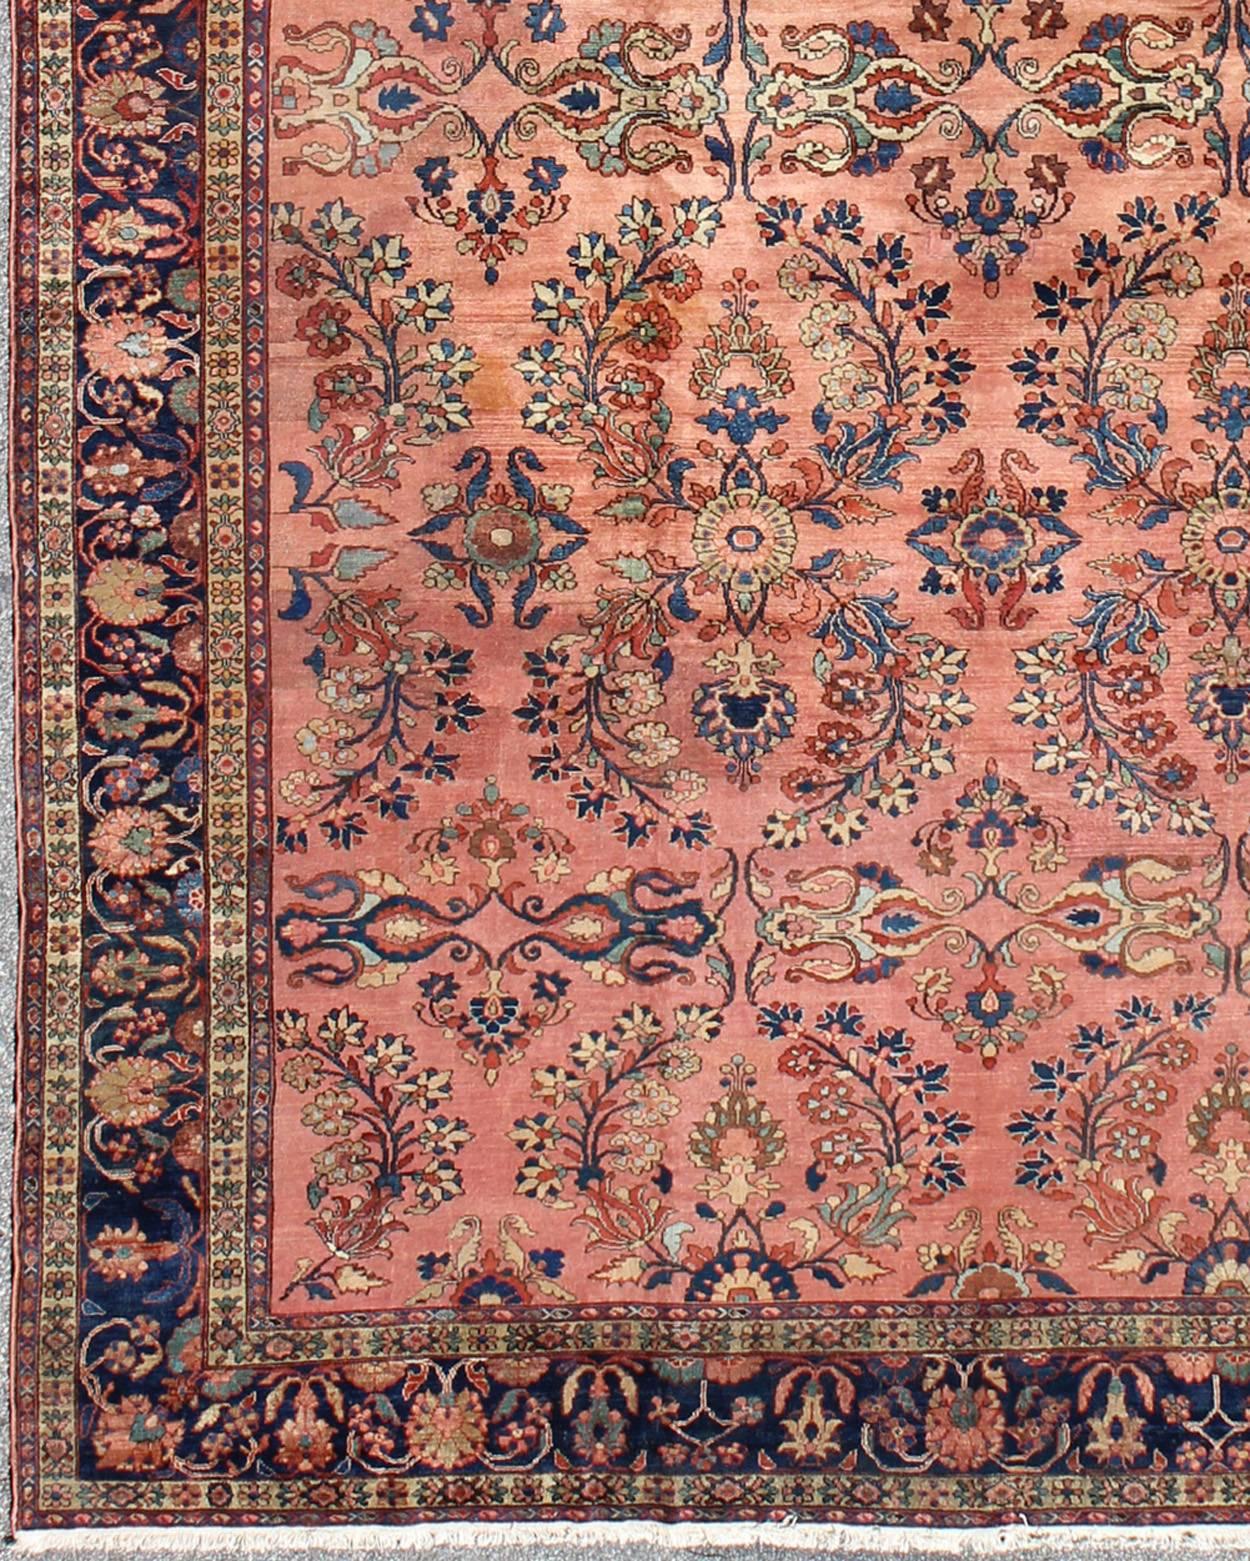 Antique Persian Lilihan Large rug in Salmon, Pink, Blue, Green and Rust Colors. Keivan Woven Arts / rug Lh-A38502, country of origin / type: Iran / Lilihan, circa 1900. , Antique Persian Large Lilihan.
Measures: 11'1 x 17'2
This immaculately woven